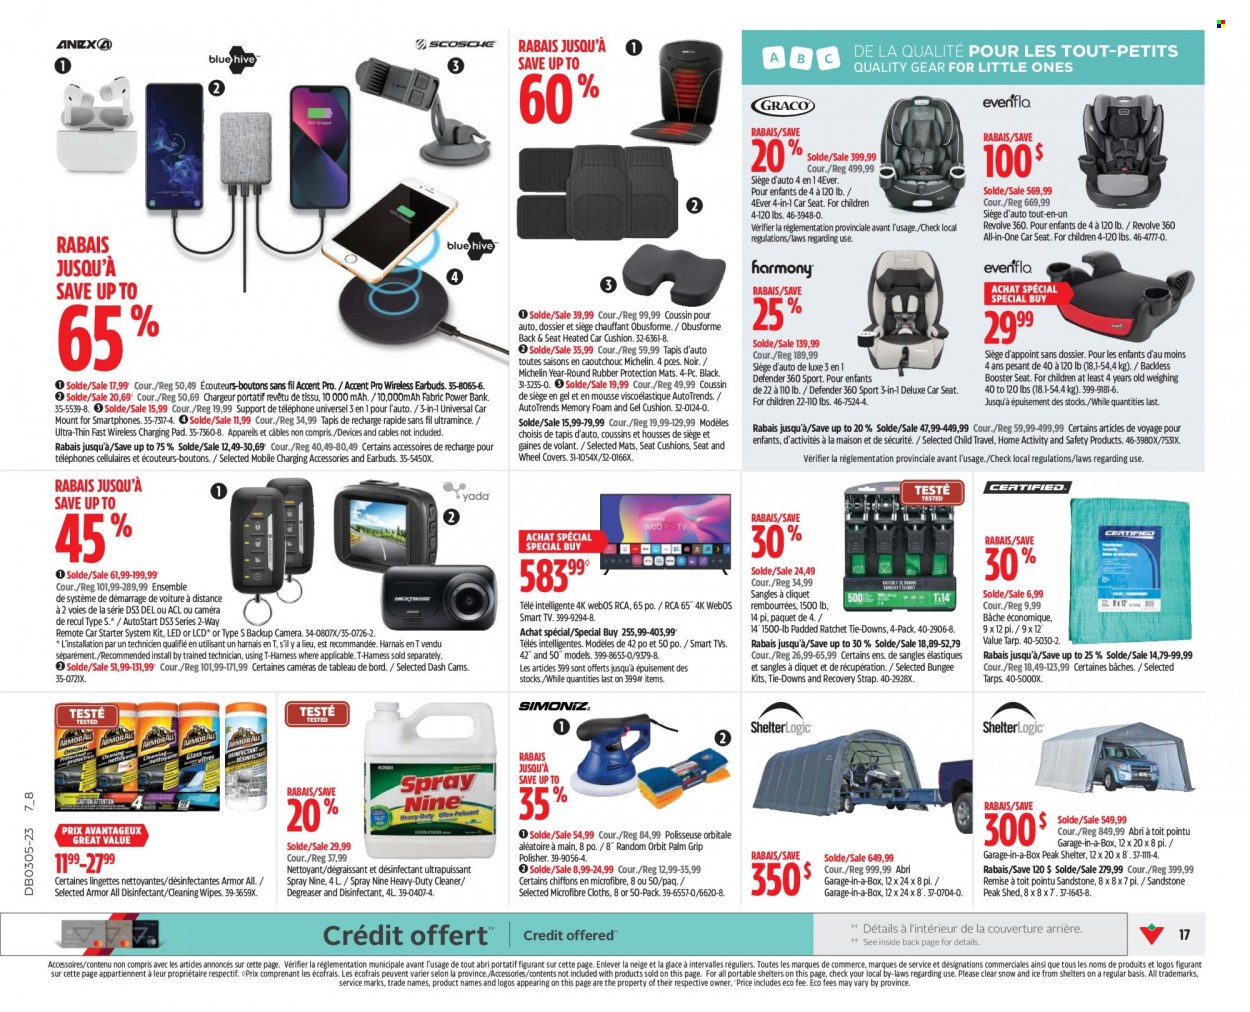 thumbnail - Canadian Tire Flyer - January 26, 2023 - February 01, 2023 - Sales products - cleansing wipes, wipes, cleaner, eraser, cushion, power bank, TV, earbuds, RCA, tarps, baby car seat, strap, shed, Armor All, starter, degreaser, wheel covers, camera, Michelin, smart tv, desinfection. Page 16.